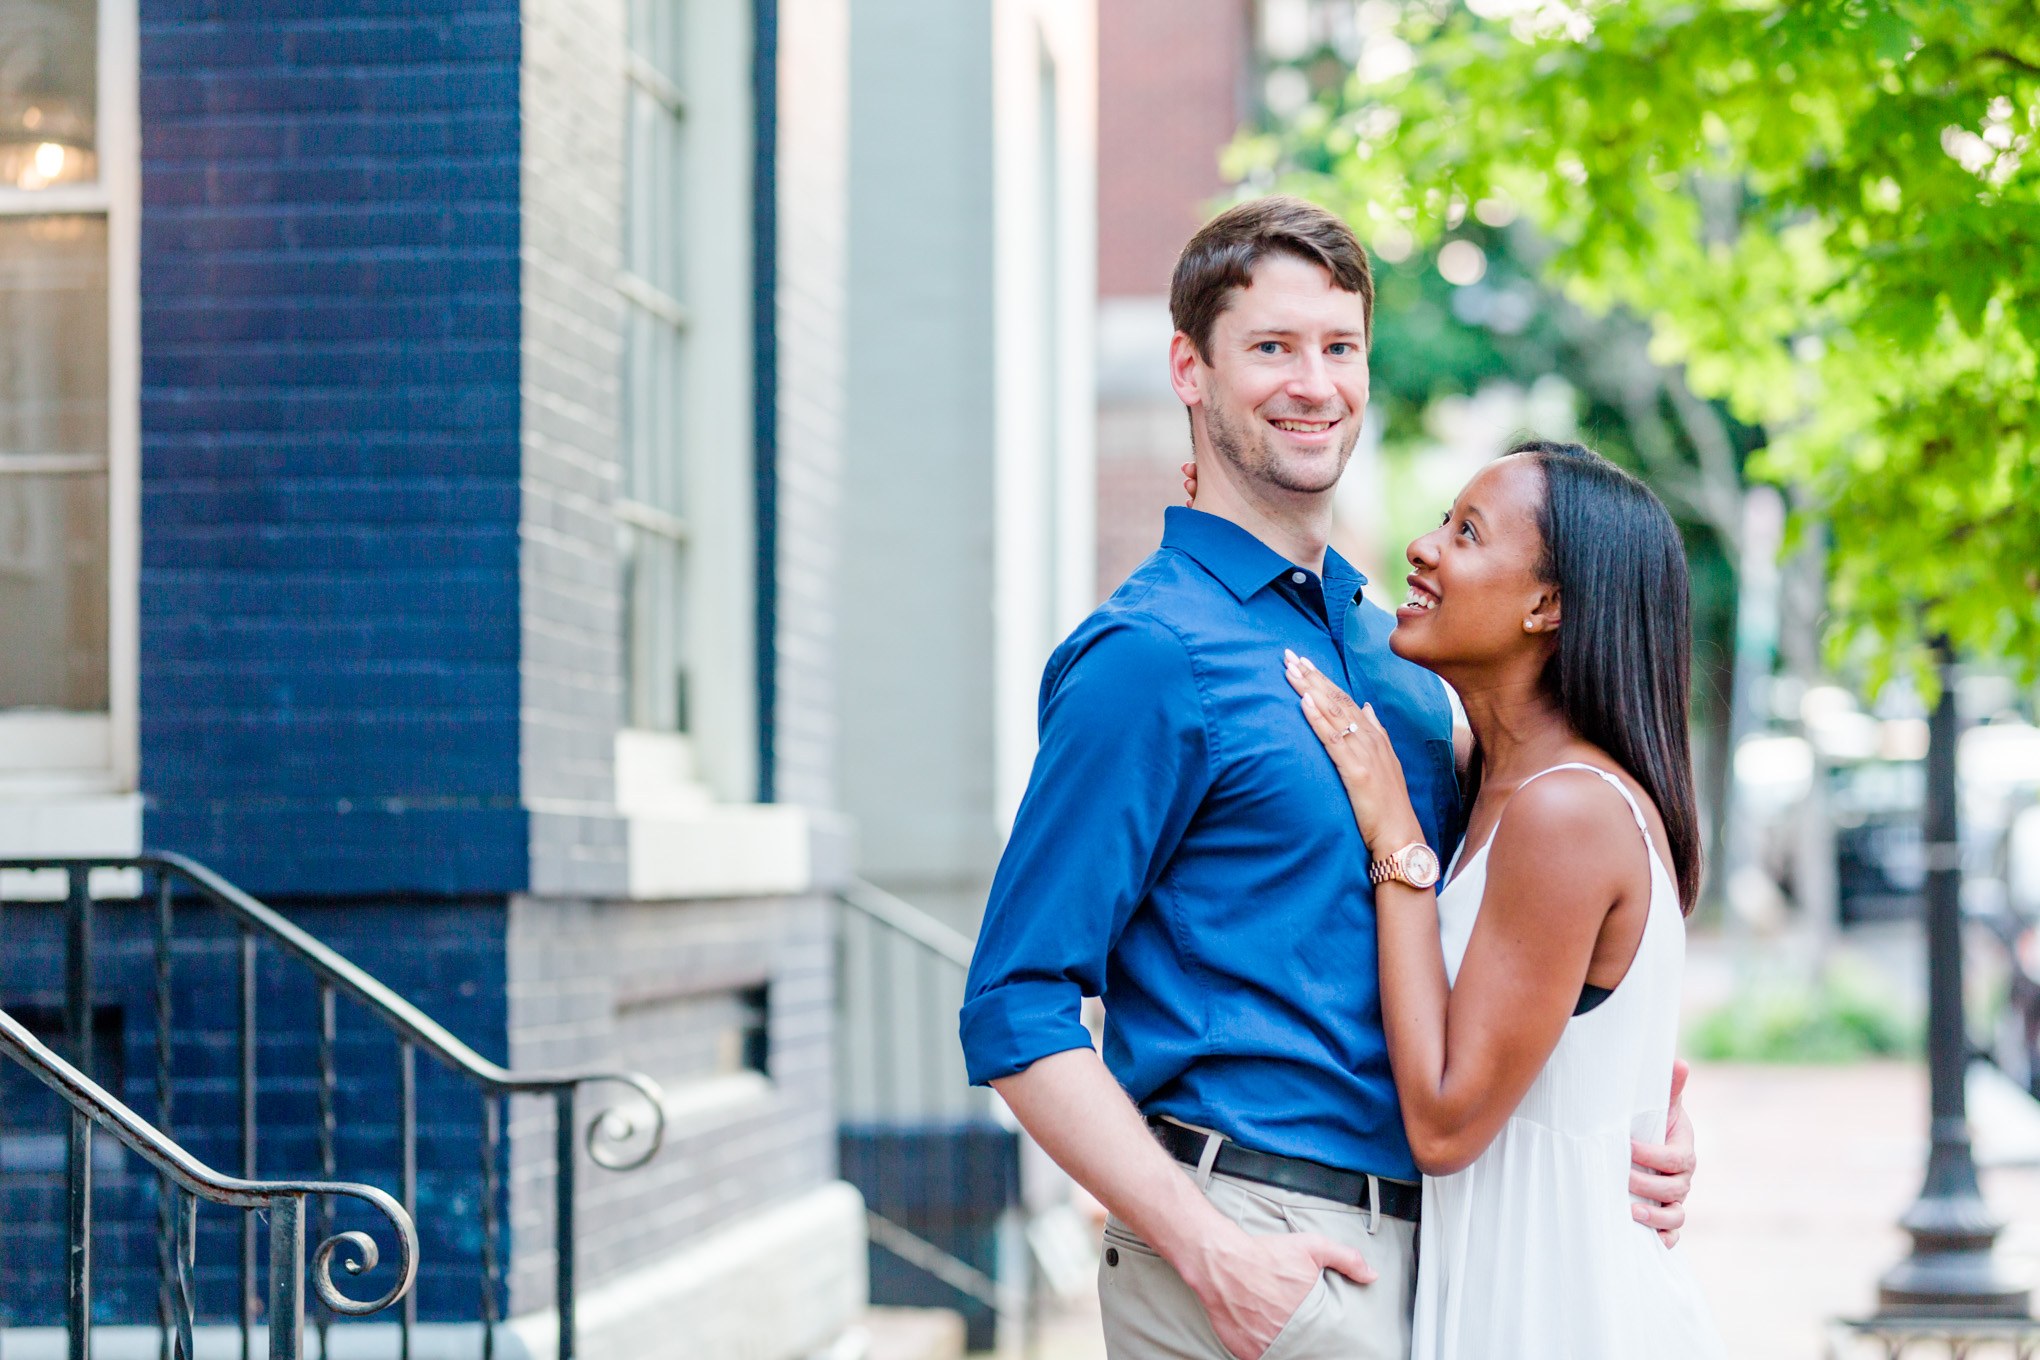 spring Georgetown engagement photos, Georgetown DC. engagement photos, Georgetown engagement photos, D.C. engagement photos, spring engagement photos, Georgetown University engagement photos, Georgetown University, spring portraits, engagement portrraits, engagement session style, summer engagement photos, Rachel E.H. Photography, engaged couple